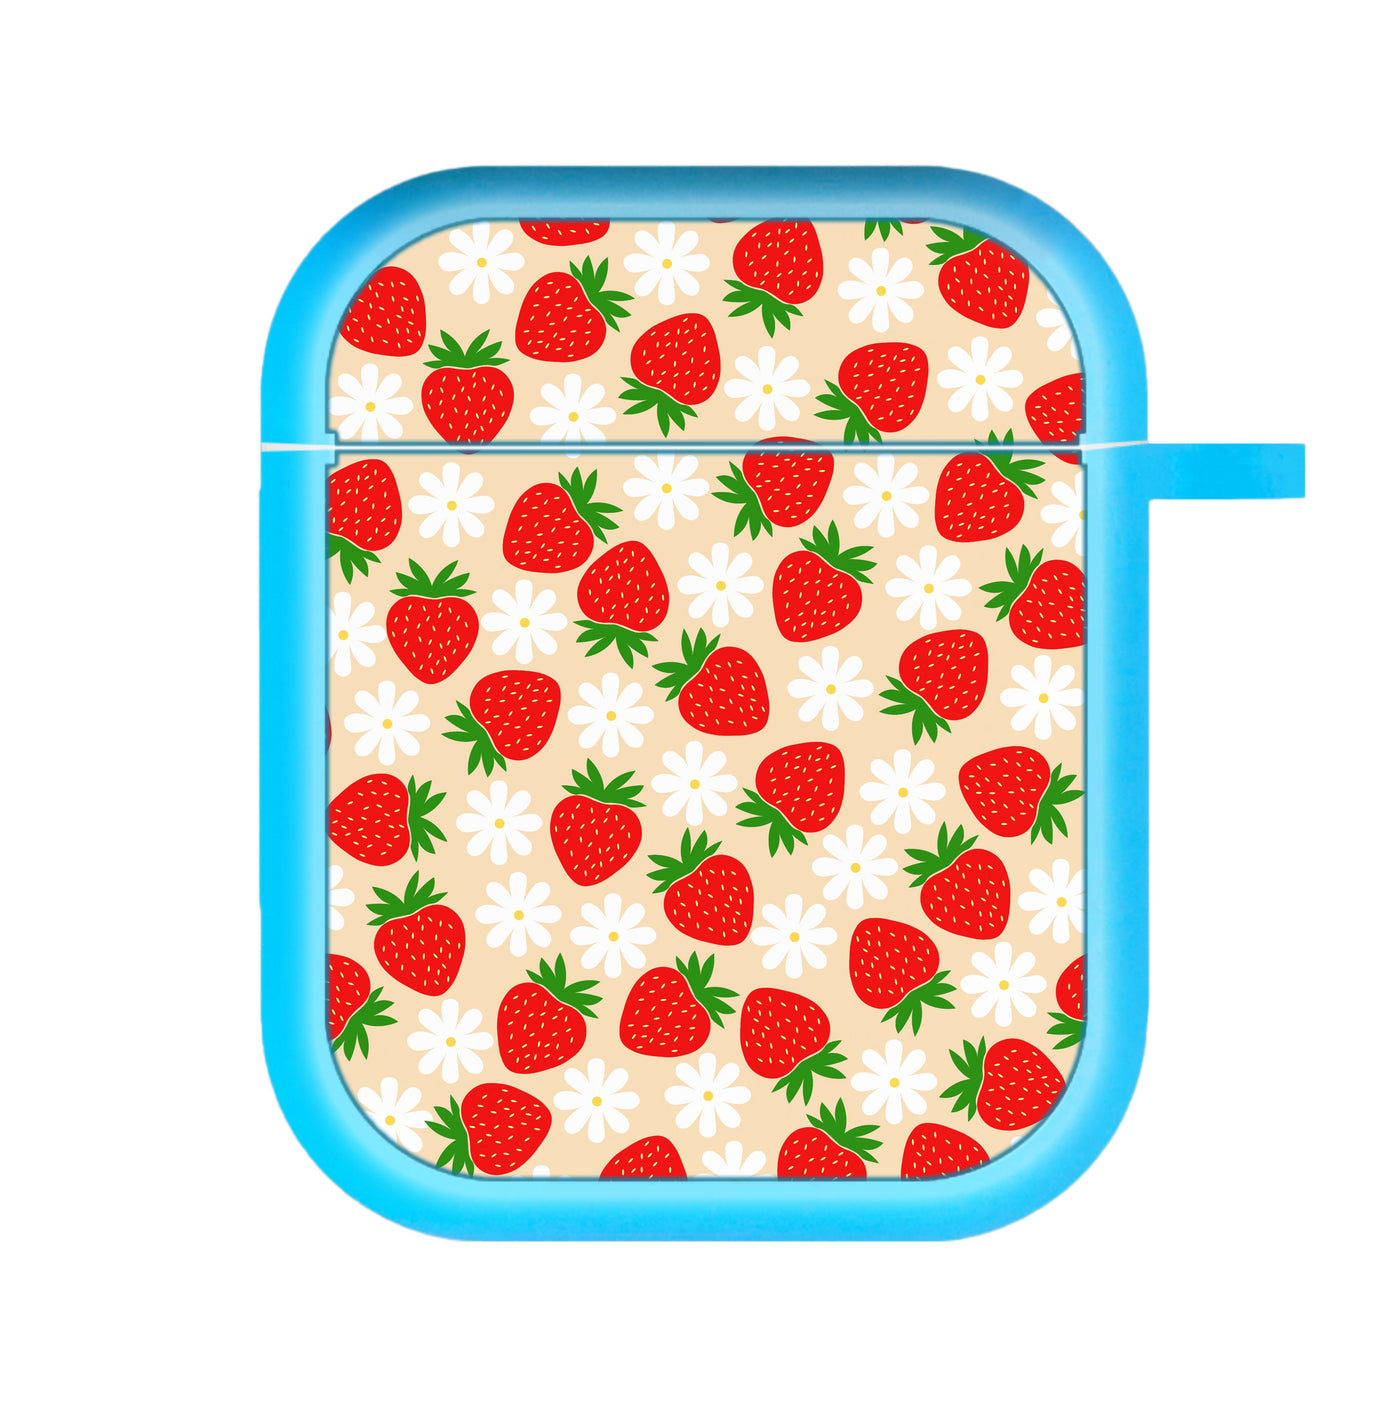 Strawberries and Flowers - Spring Patterns AirPods Case